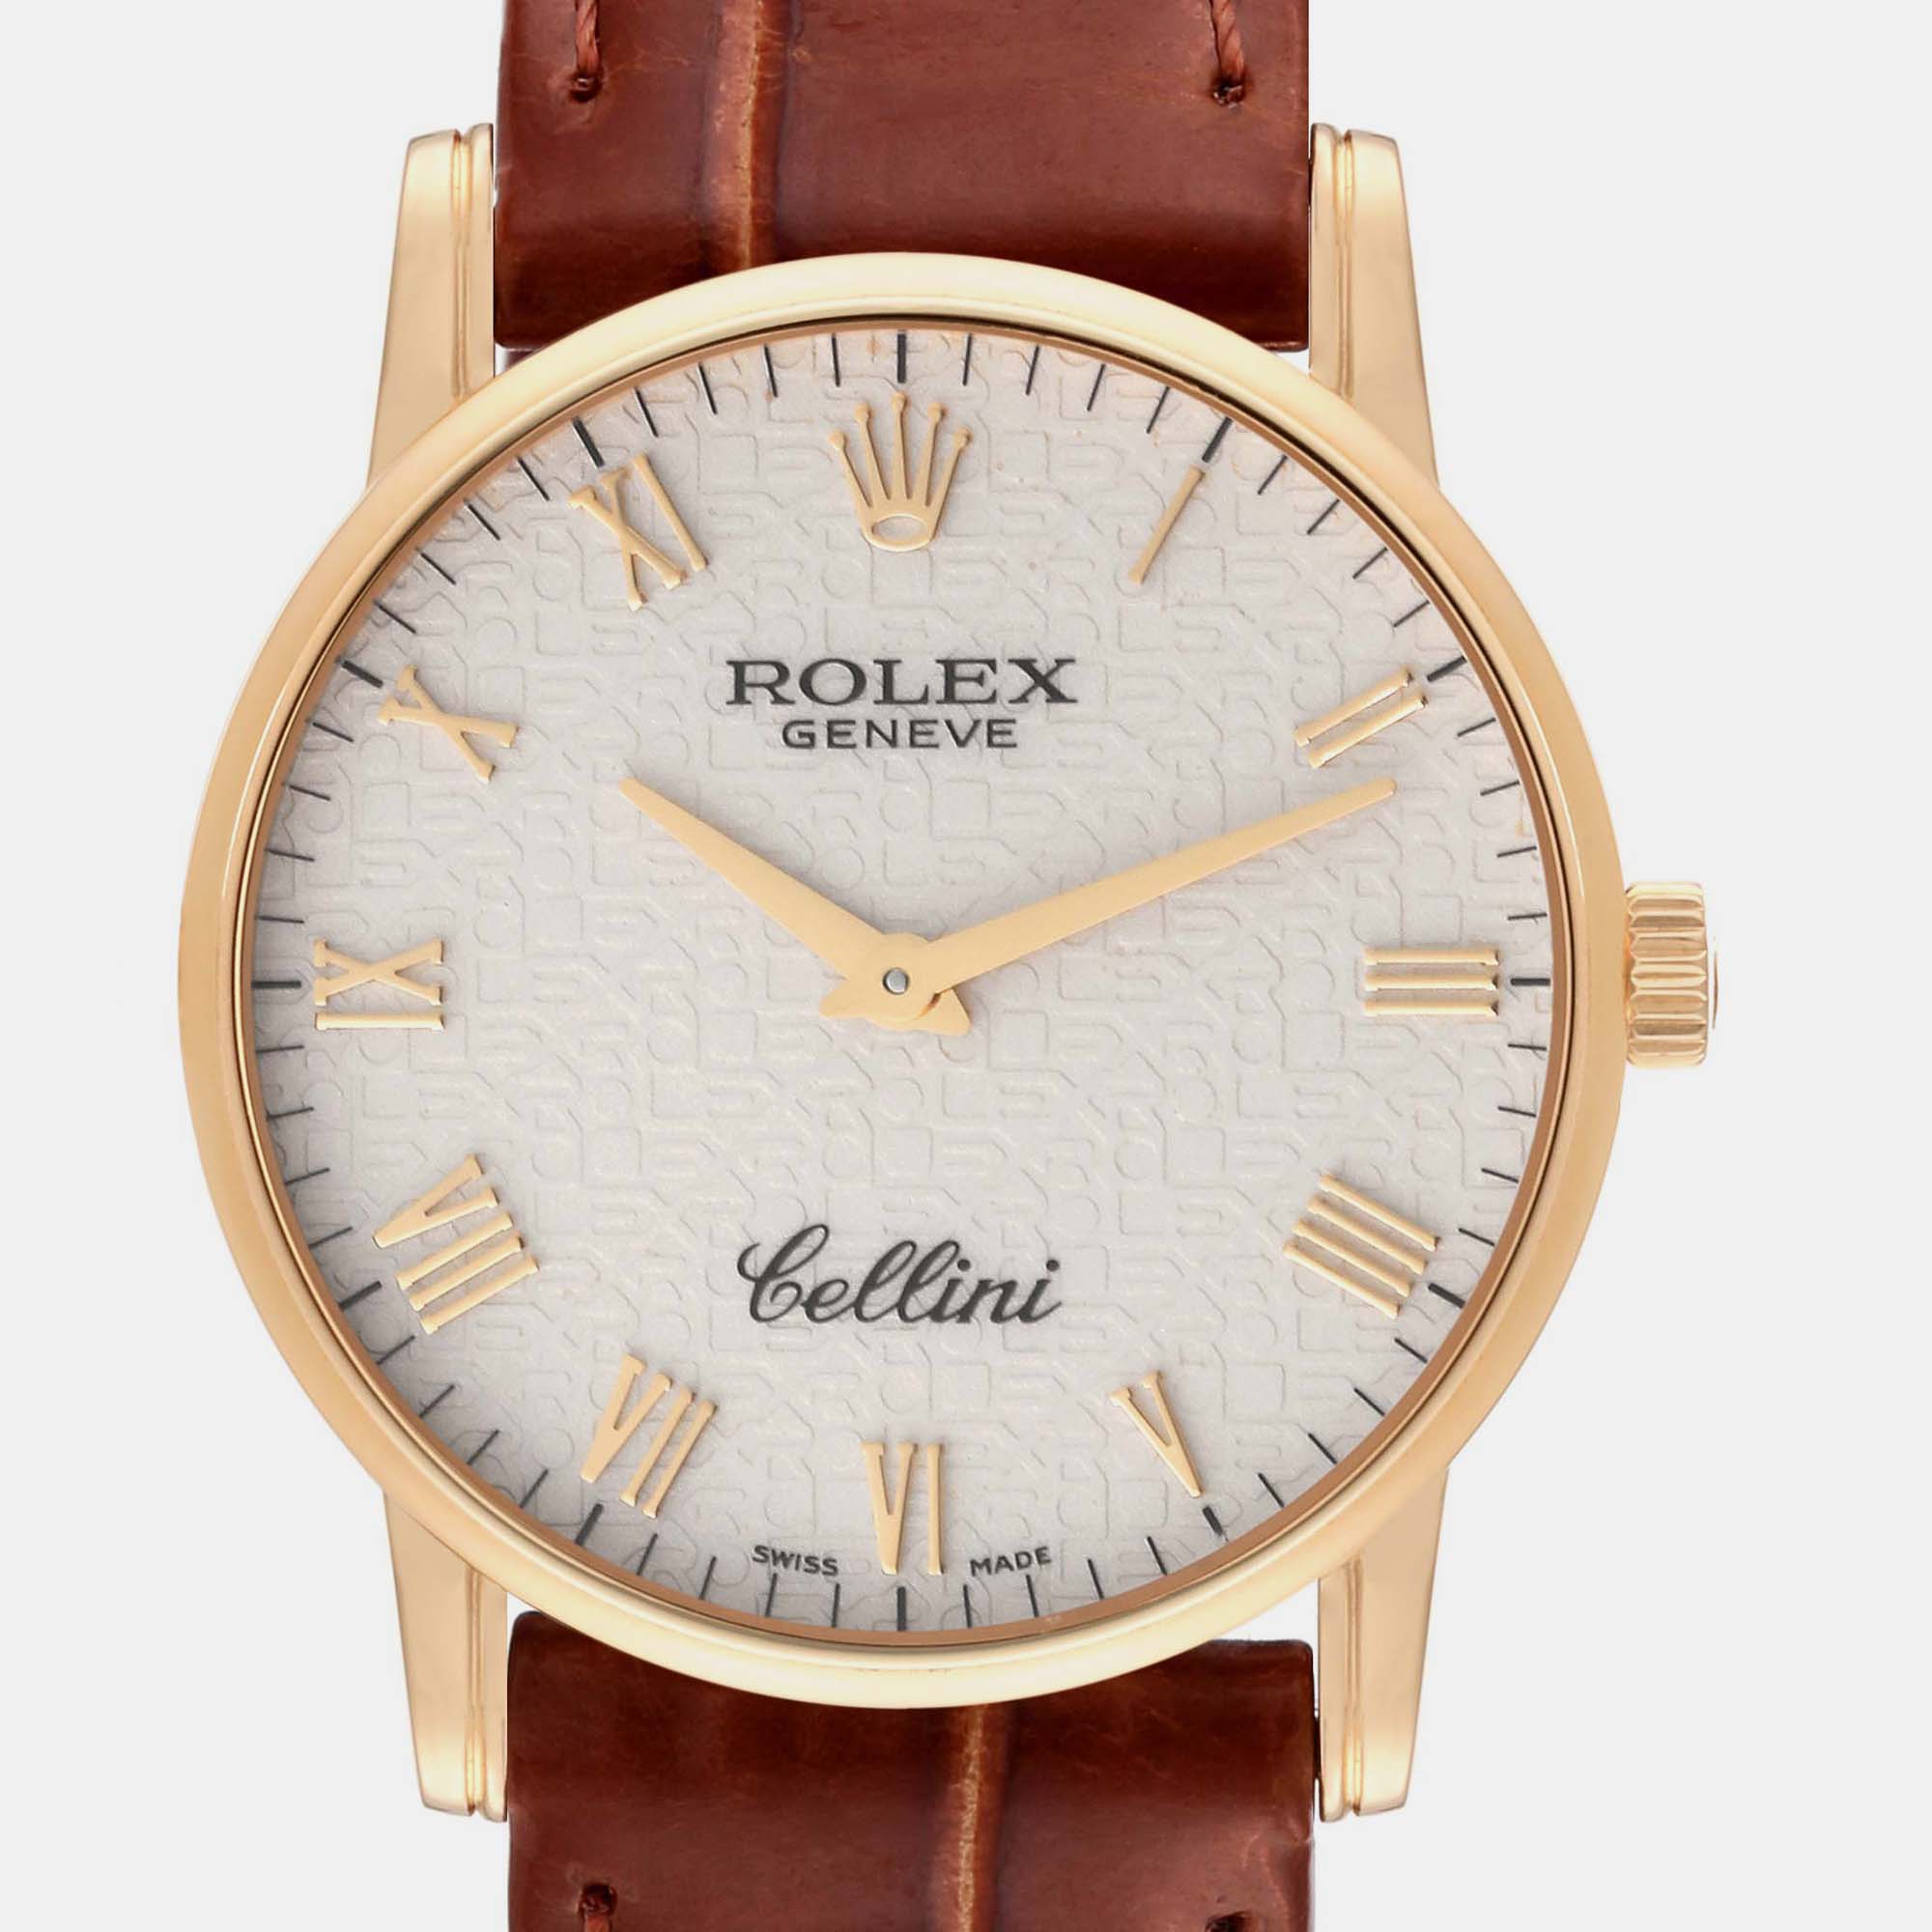 Rolex Cellini Classic Yellow Gold Anniversary Dial Mens Watch 5116 31.8 Mm